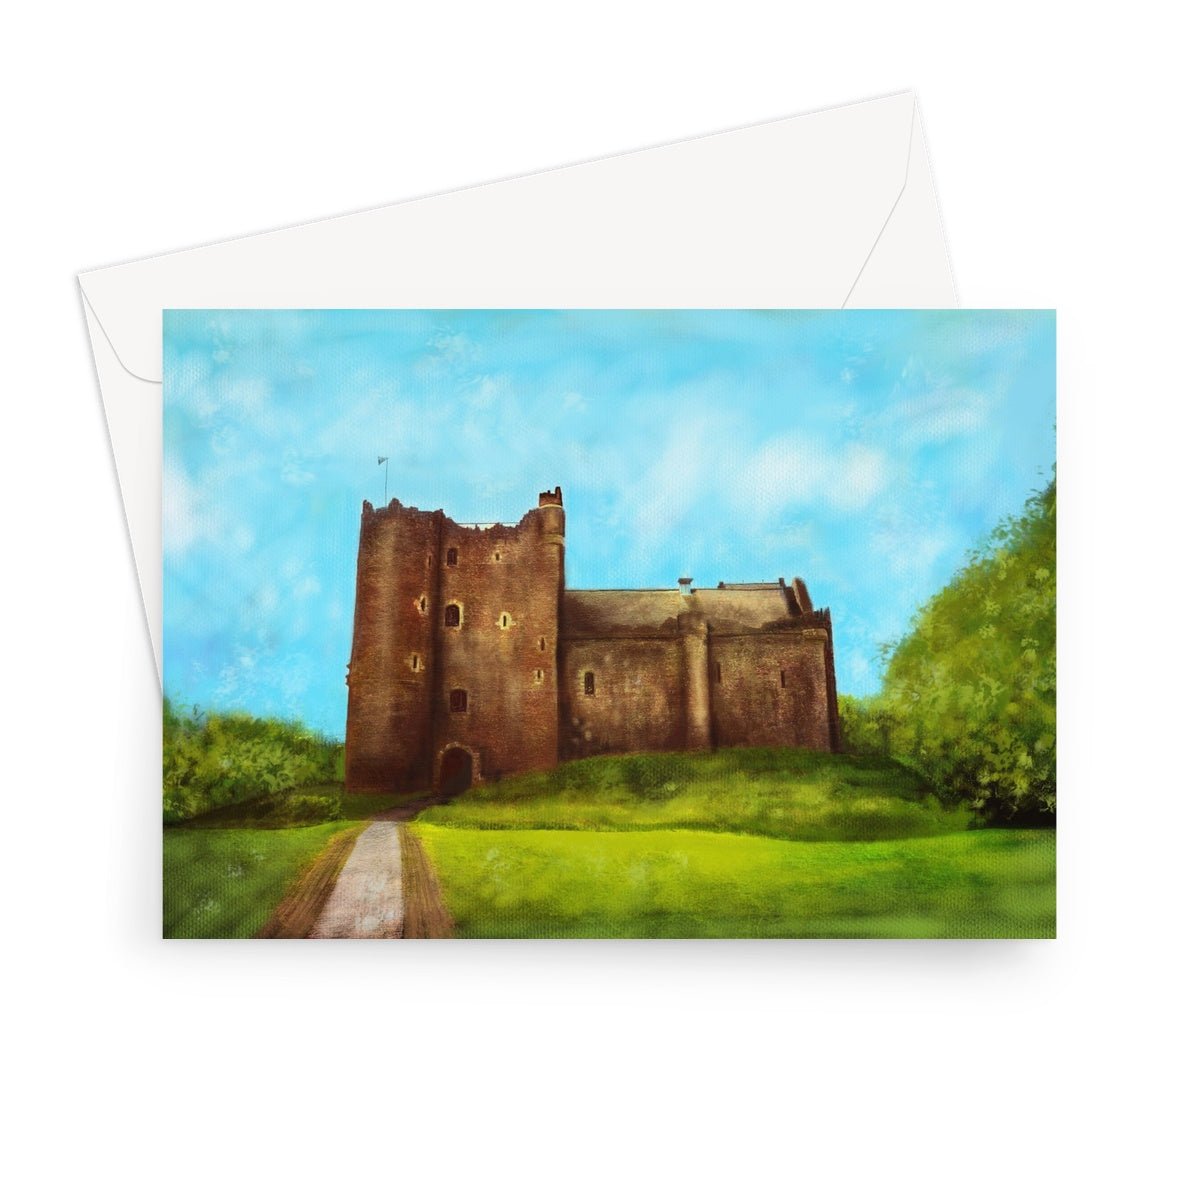 Doune Castle Art Gifts Greeting Card-Greetings Cards-Scottish Castles Art Gallery-7"x5"-10 Cards-Paintings, Prints, Homeware, Art Gifts From Scotland By Scottish Artist Kevin Hunter